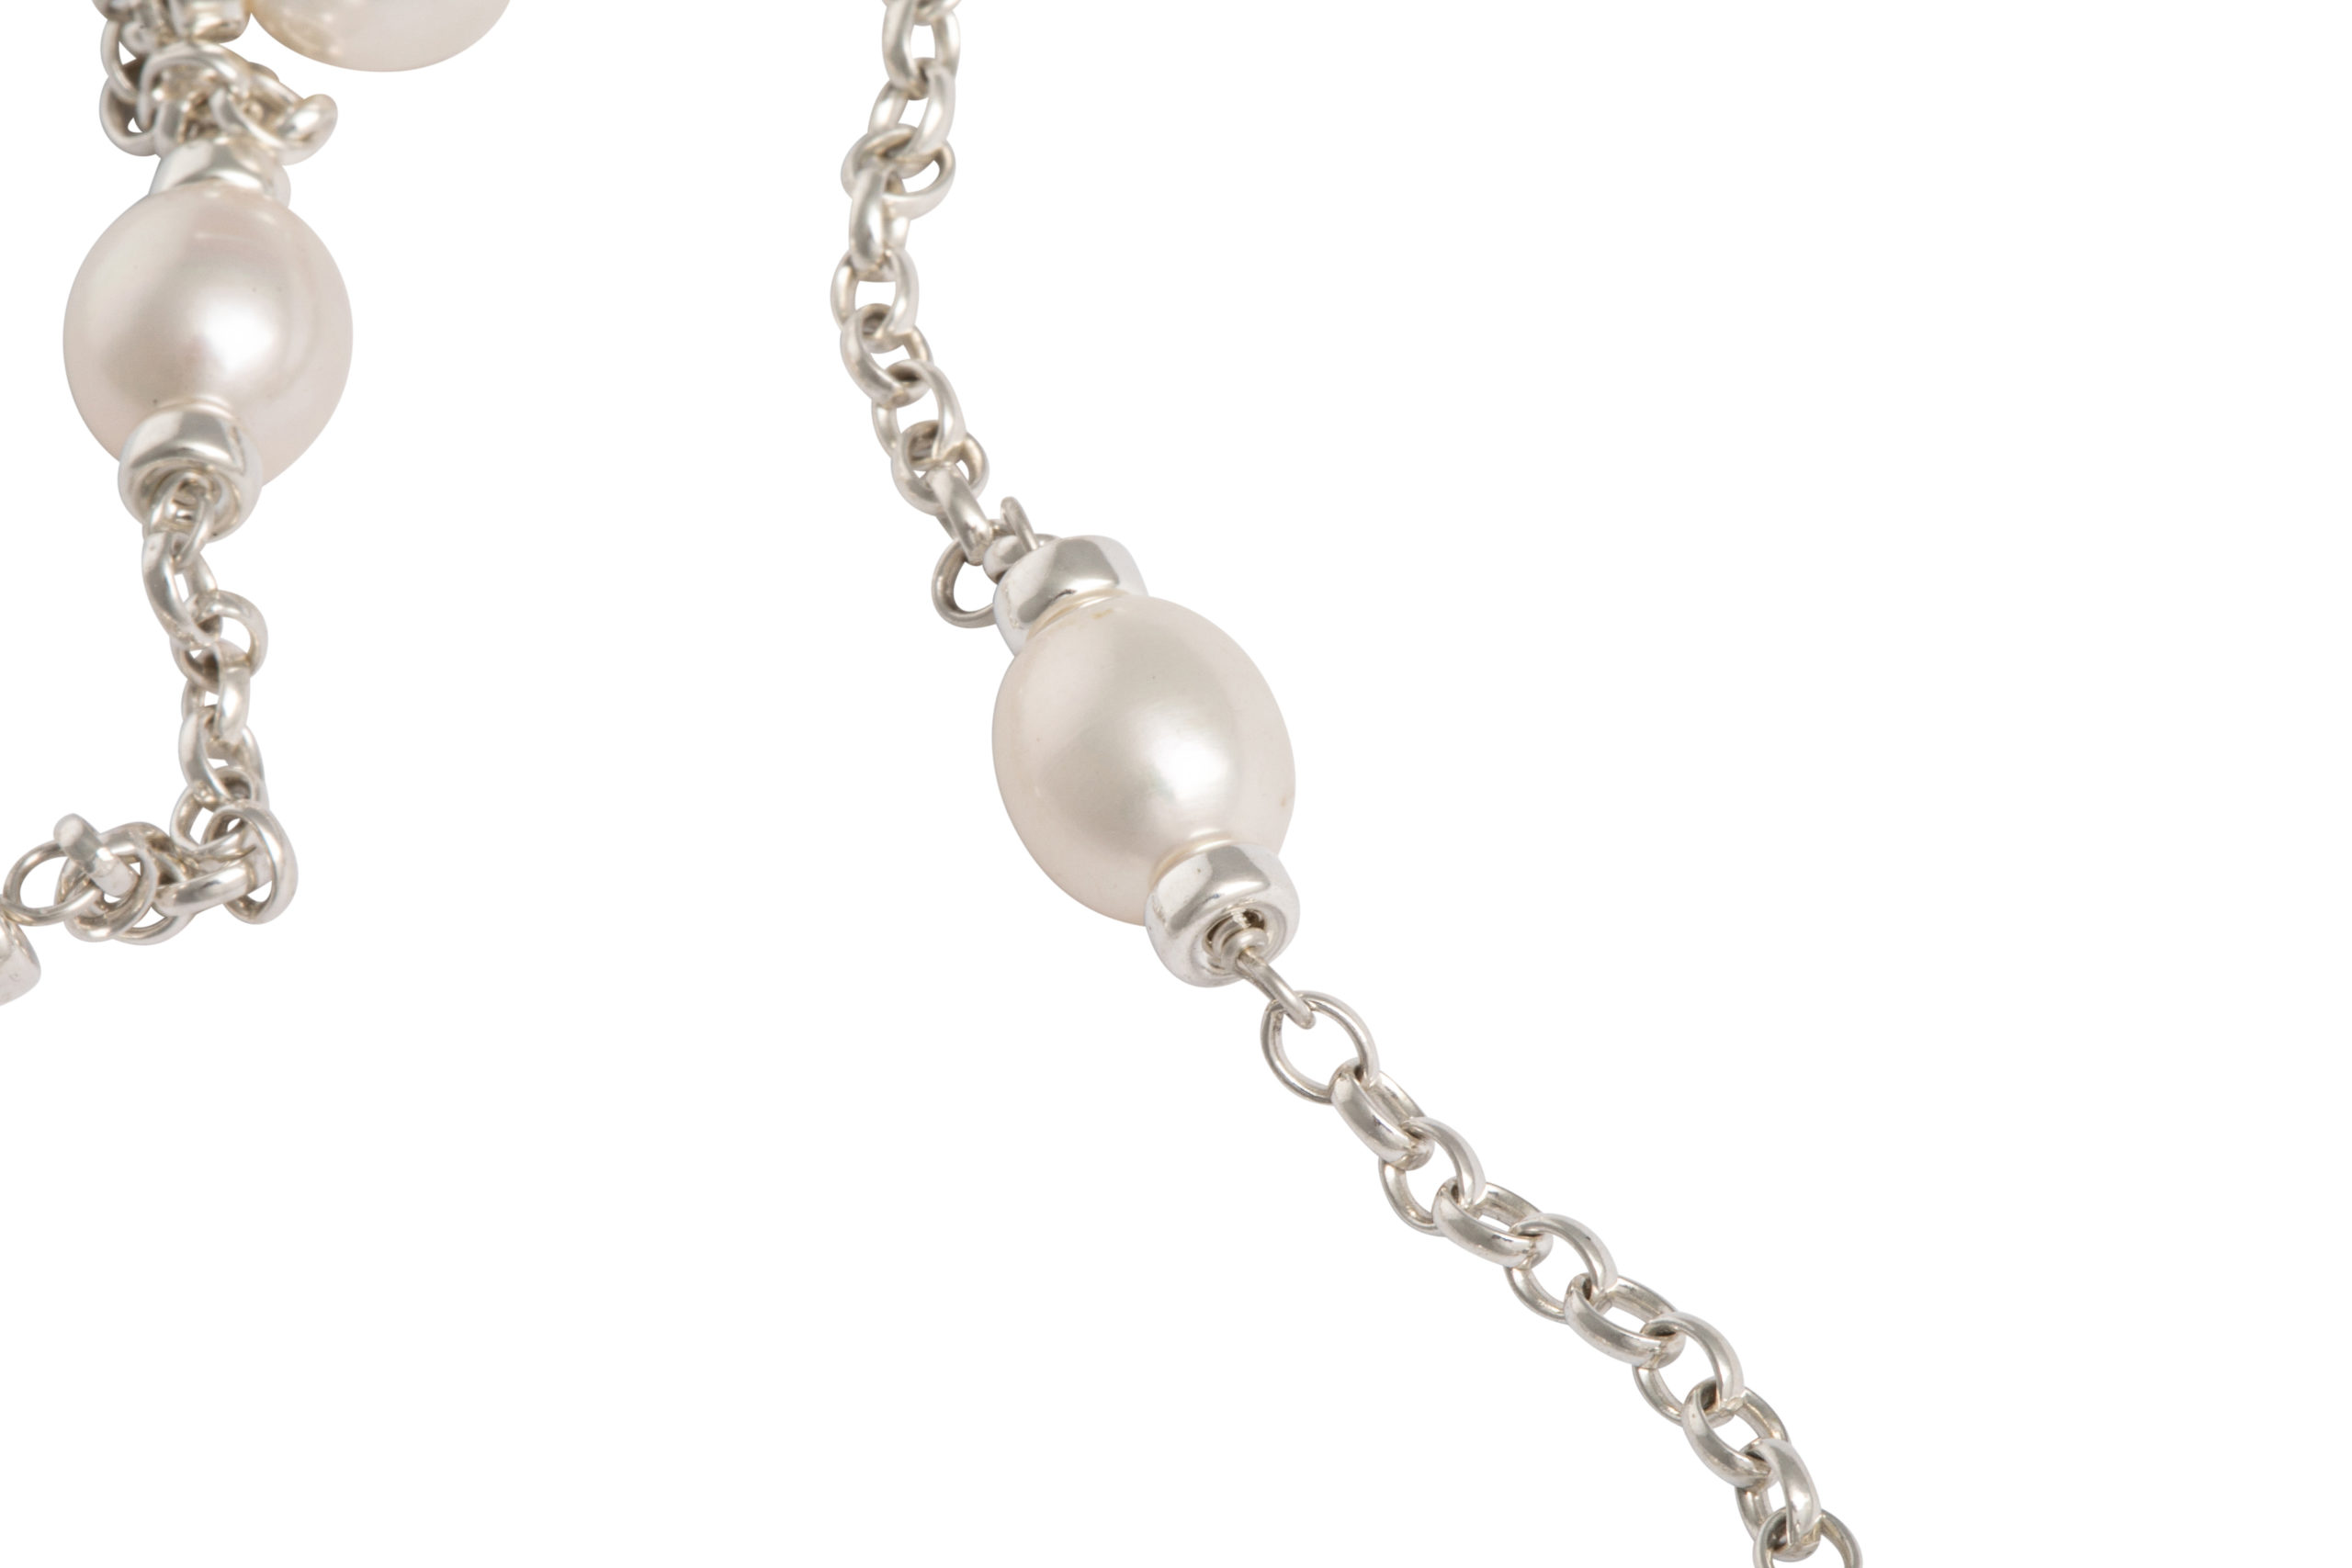 Silver Mary Berry style necklace - Harriet Whinney Pearls